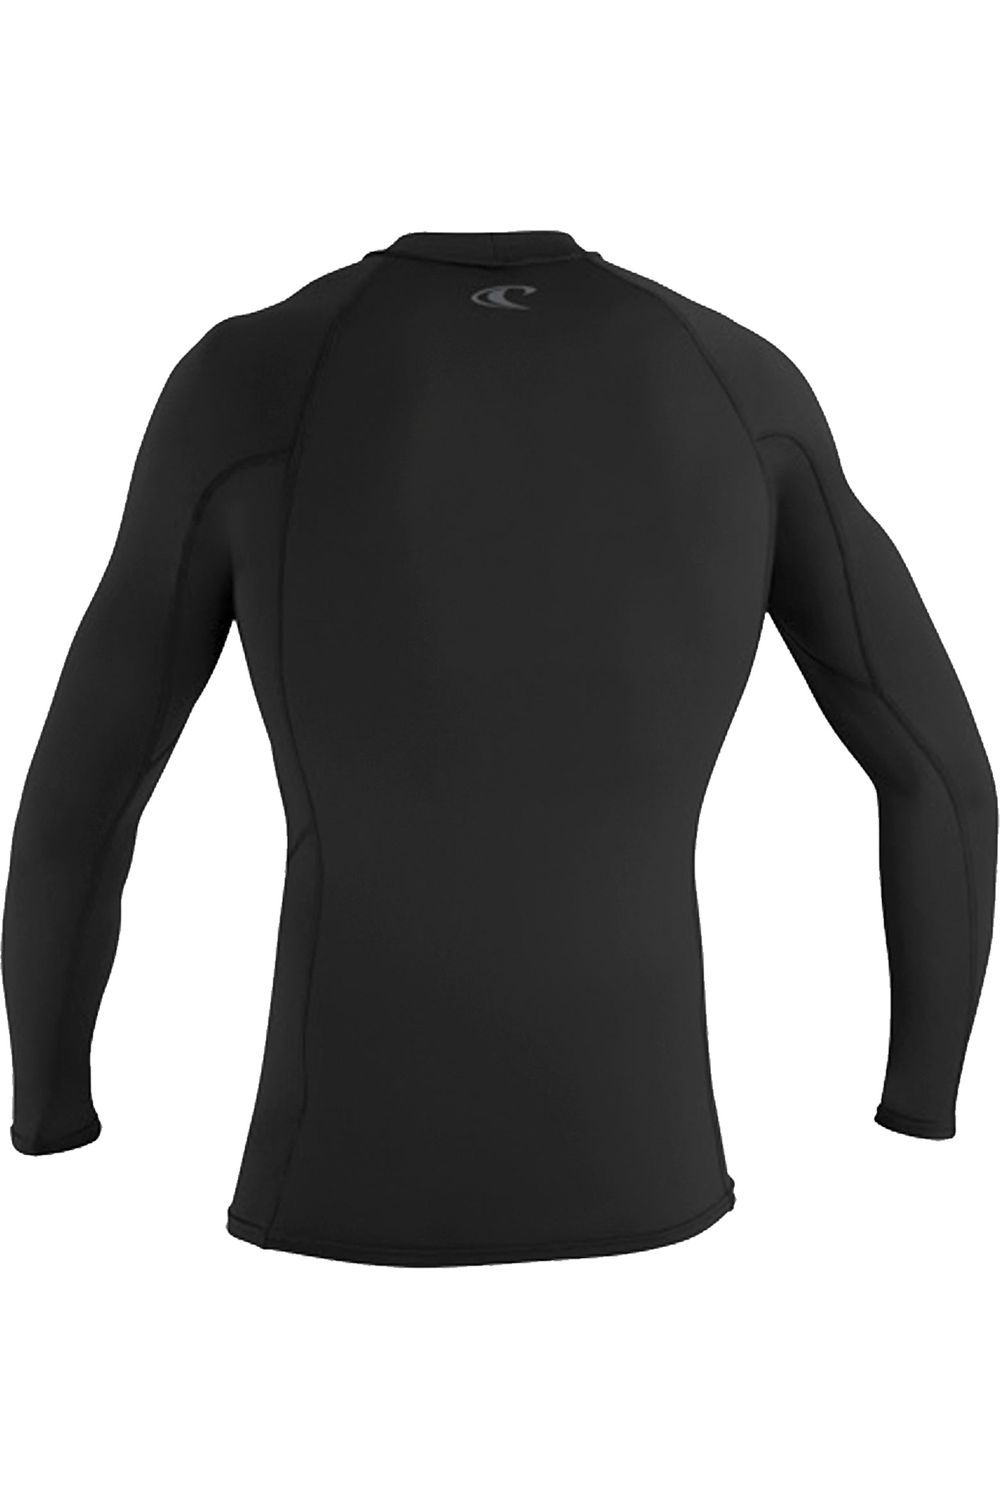 O'Neill Thermo-X Long Sleeve Top